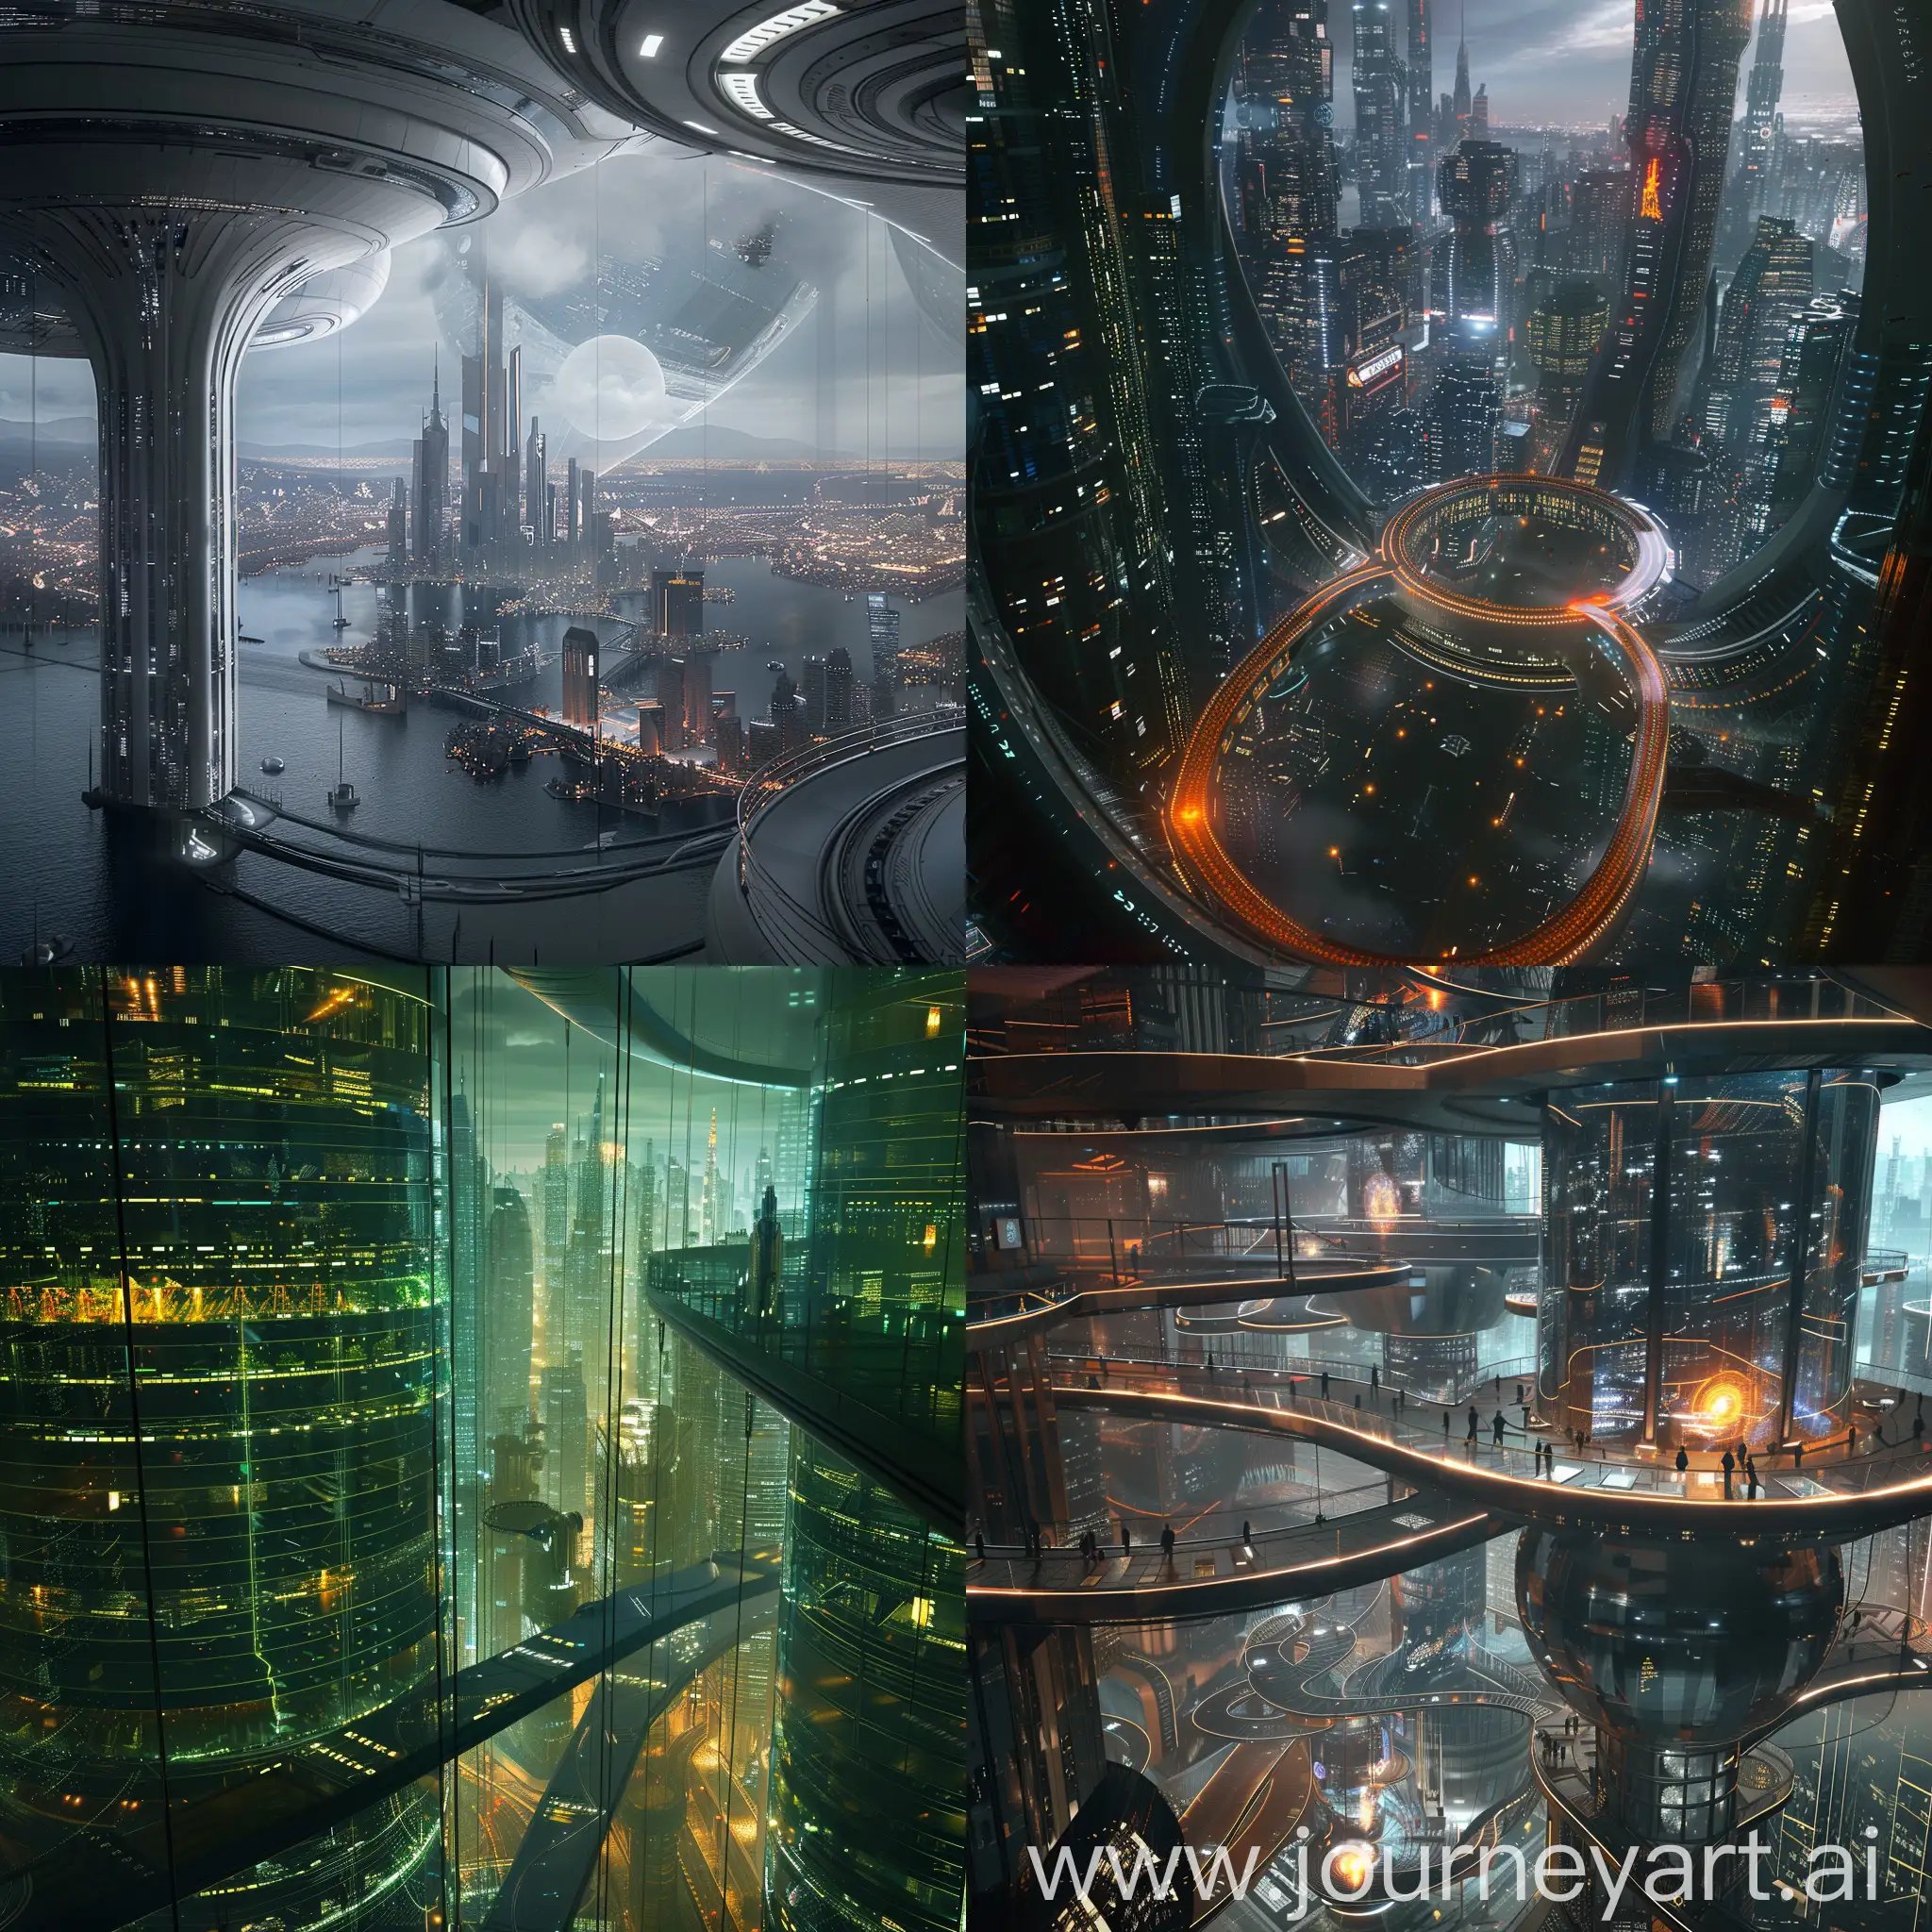 Futuristic Vladivostok, Synecdoche, New York City Inspired Transit Tubes, Ex Machina-esque Bio-luminescent Walls, Minority Report-style Pre-Crime Holographic Projections, Cloud Atlas-inspired Sky-Gardens, Arrival-influenced Biomimetic Architecture, Inception-inspired Dream-Weaving Rooms, Bladerunner 2049-style Personal Augmented Reality (PAR) Interfaces, Annihilation-inspired Shimmer-like Bio-domes, Sense8-inspired Empathic Communication Network, Primer-inspired Time-Dilation Chambers, Altered Carbon-esque Stack Ports, Sunshine-inspired Solar Ribbon Highway, The Expanse-style Zero-G Elevator to Orbital Hub, Metropolis-inspired Machine City on the Seabed, Pacific Rim-inspired Jaeger Docking Towers, Elysium-inspired Sky-Cities for the Elite, Spirited Away-inspired Bathhouse District Geothermal Power Plant, The Matrix-inspired "Unplug" Virtual Reality Pods, Ex Machina-esque Vertical Wind Farms, Inception-inspired Dream-Scape Parks, unreal engine 5 rendering, 4K-UHD, 8K-UHD, soft shadows, soft reflections, soft lighting, soft light, soft details, hard shadows, hard reflections, hard lighting, hard light, hard details --stylize 1000